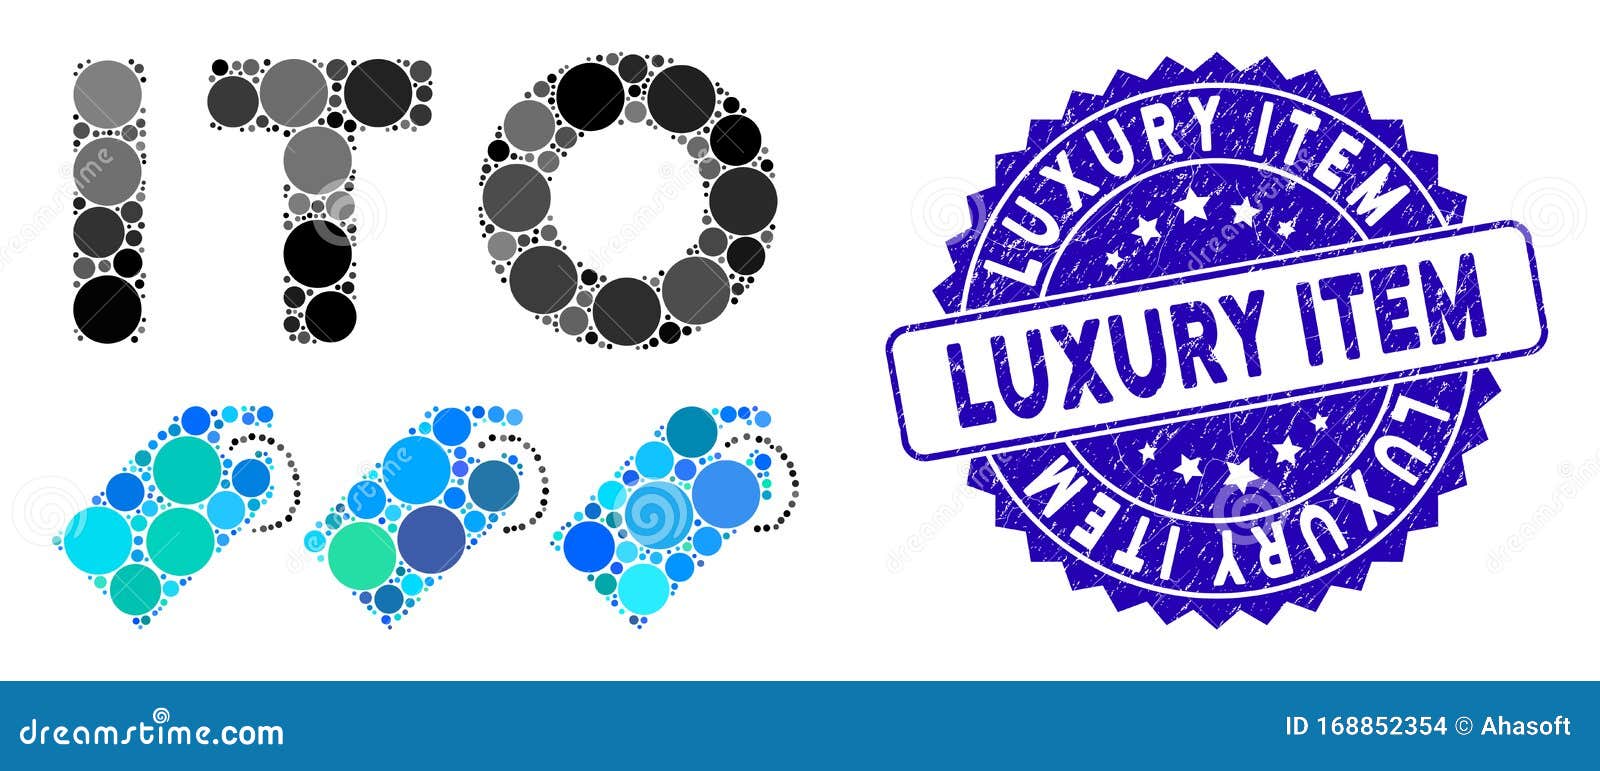 Collage ITO Tokens Icon with Textured Luxury Item Seal Stock Illustration -  Illustration of circle, luxury: 168852354